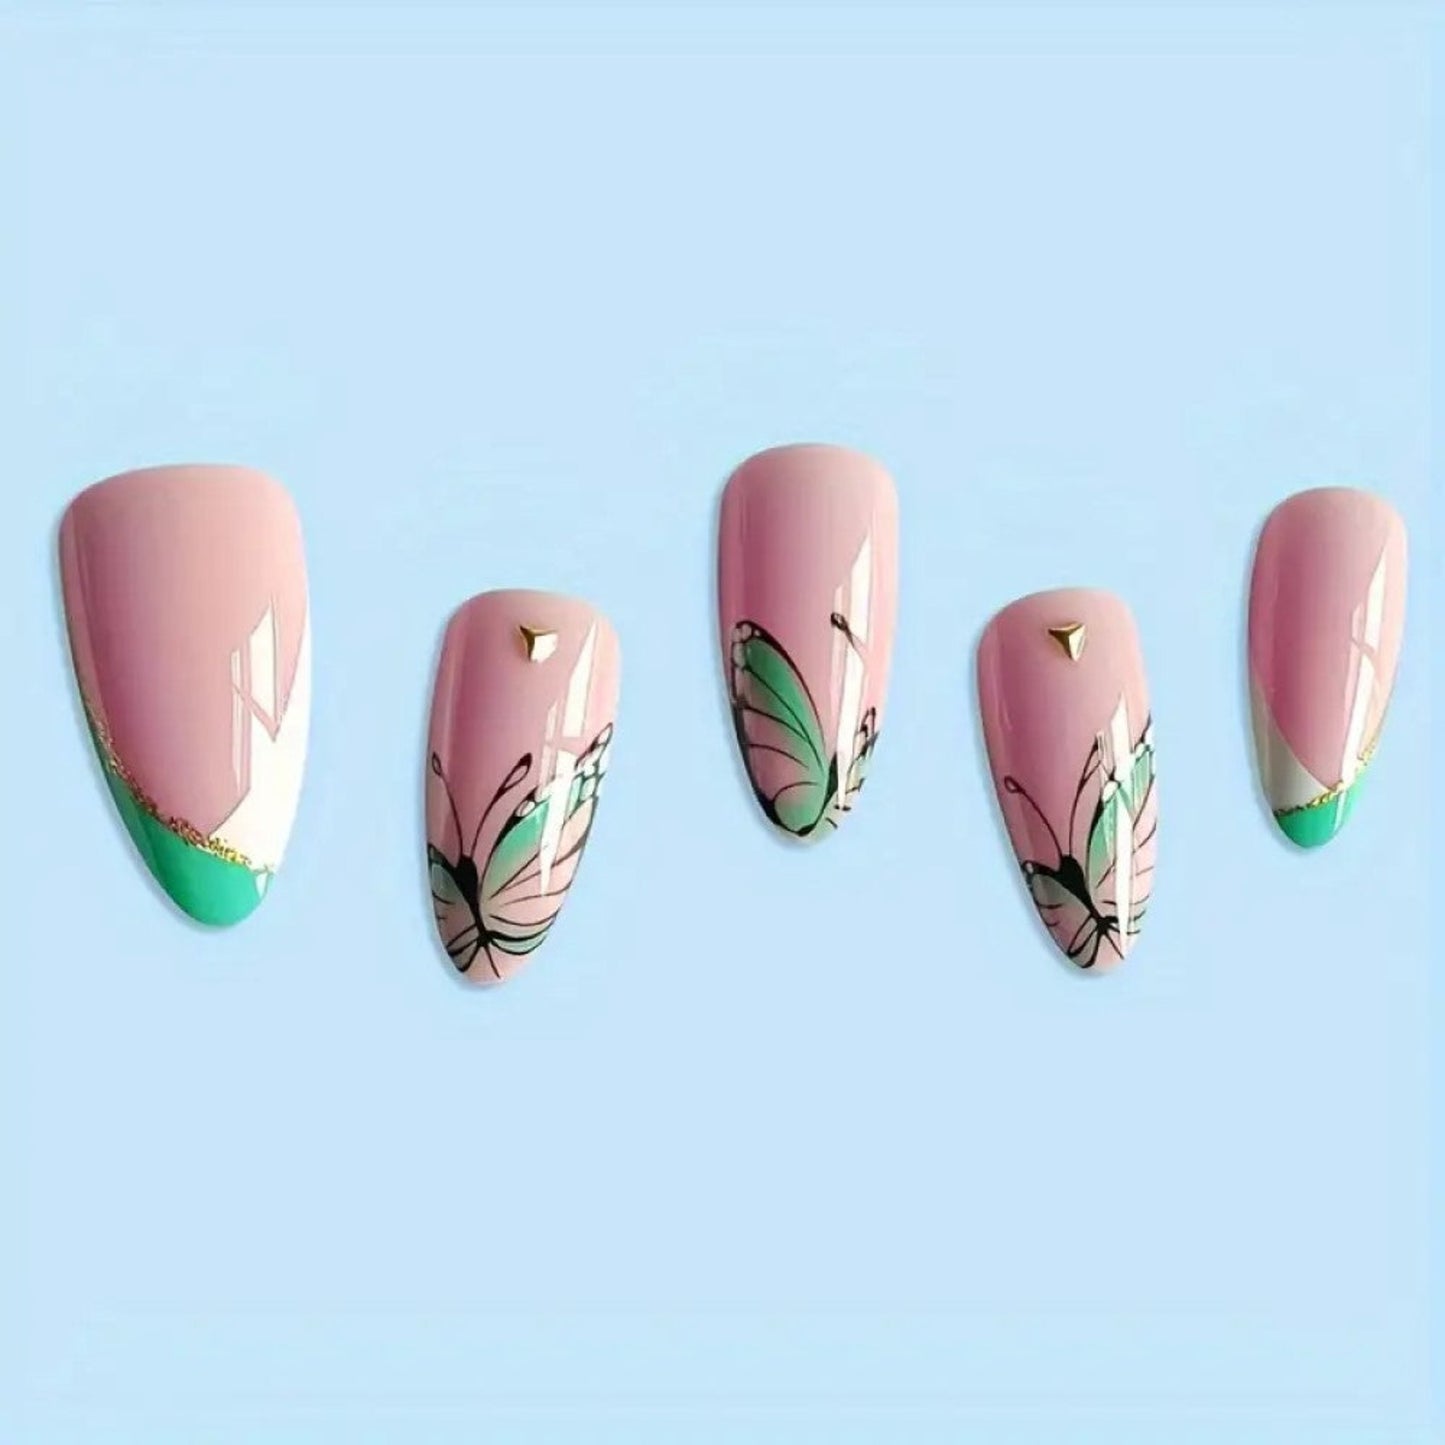 Faux ongles press on nails motif papillons